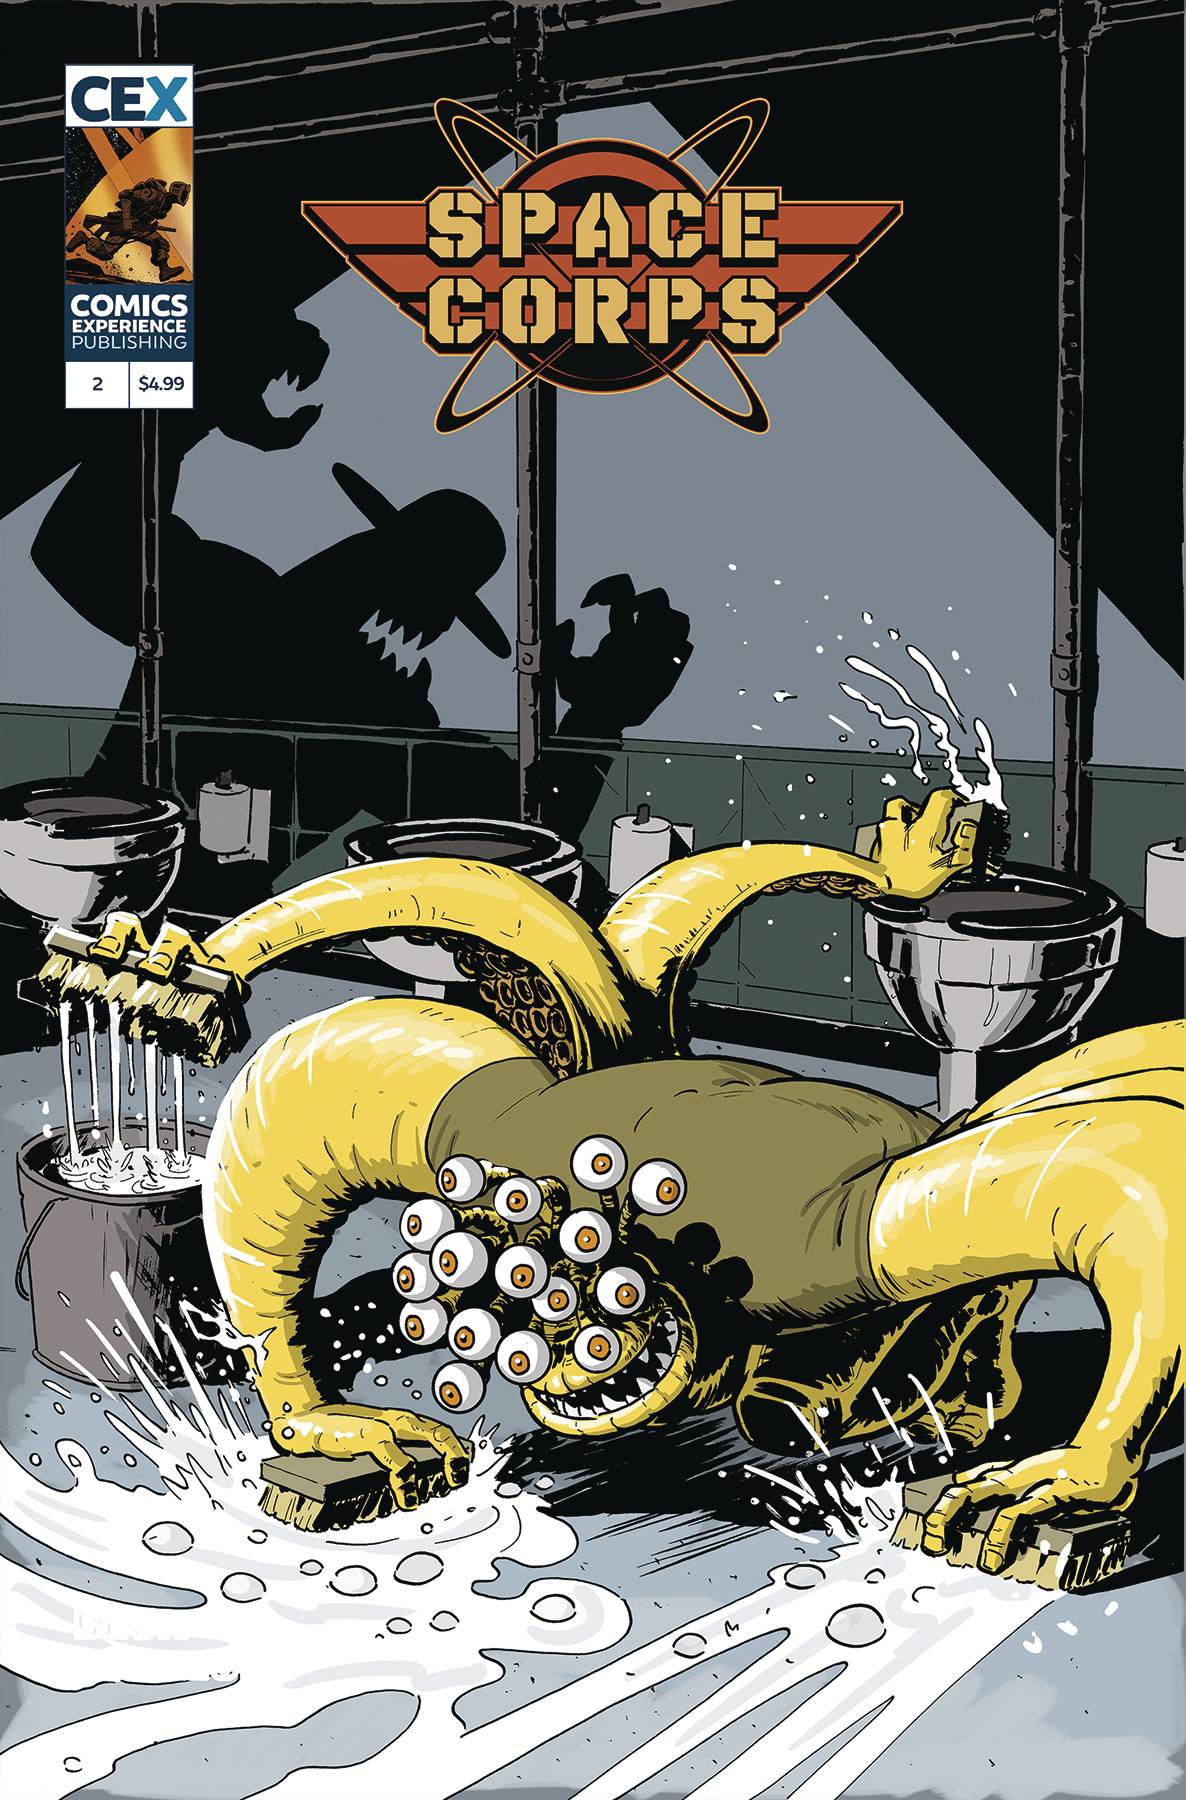 SPACE CORPS #2 (OF 3) CVR A BECK (MR)